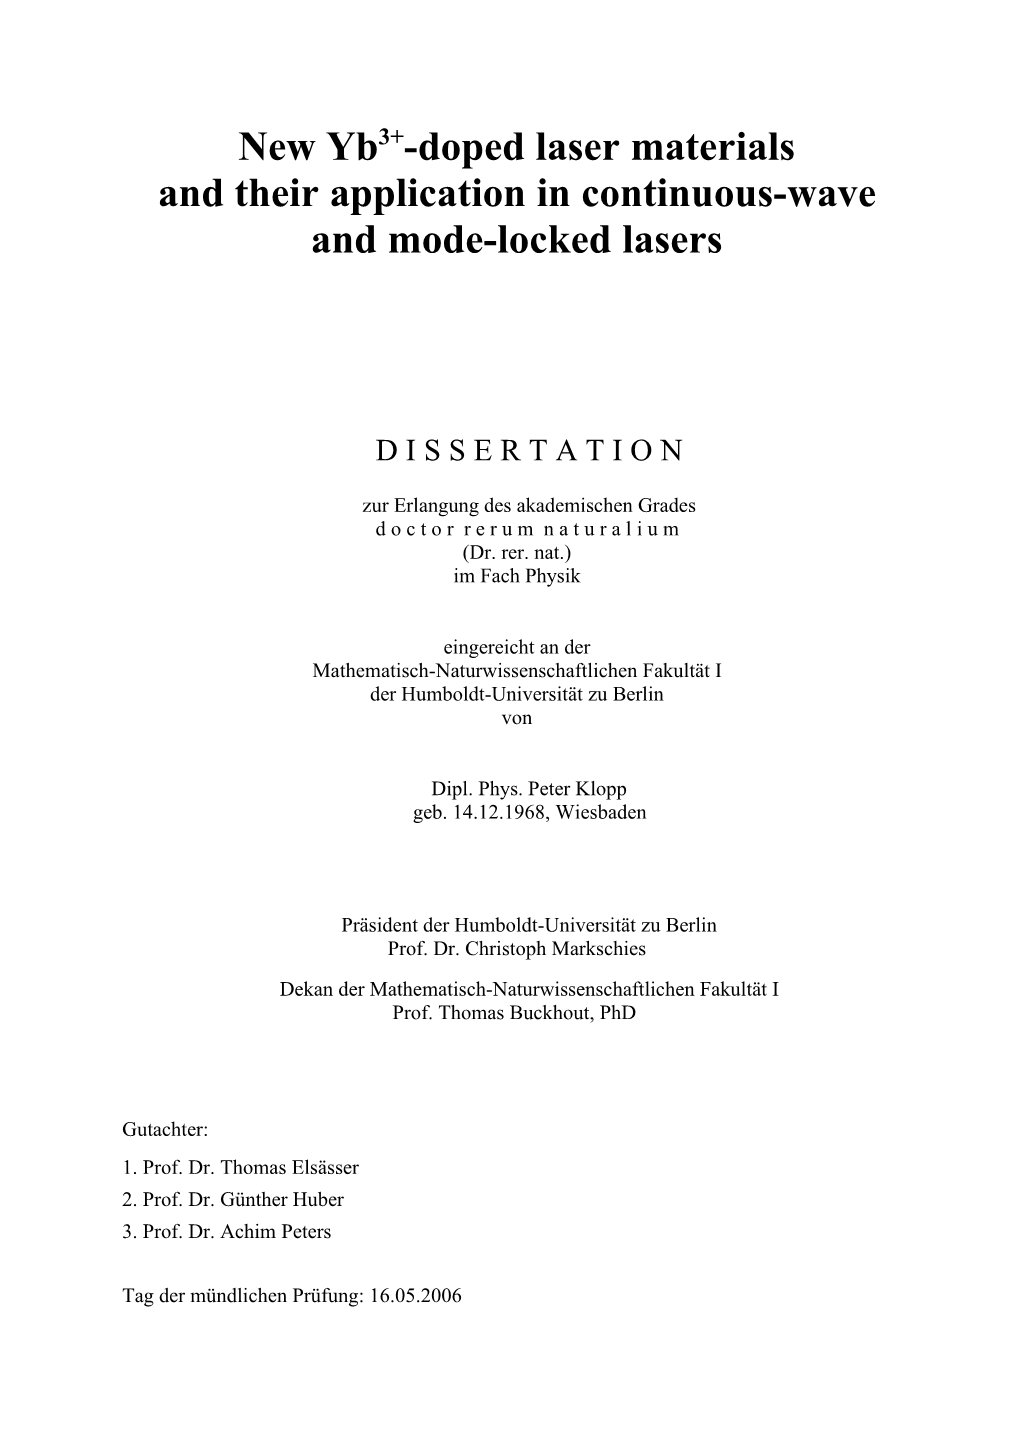 New Yb3+-Doped Laser Materials and Their Application in Continuous-Wave and Mode-Locked Lasers